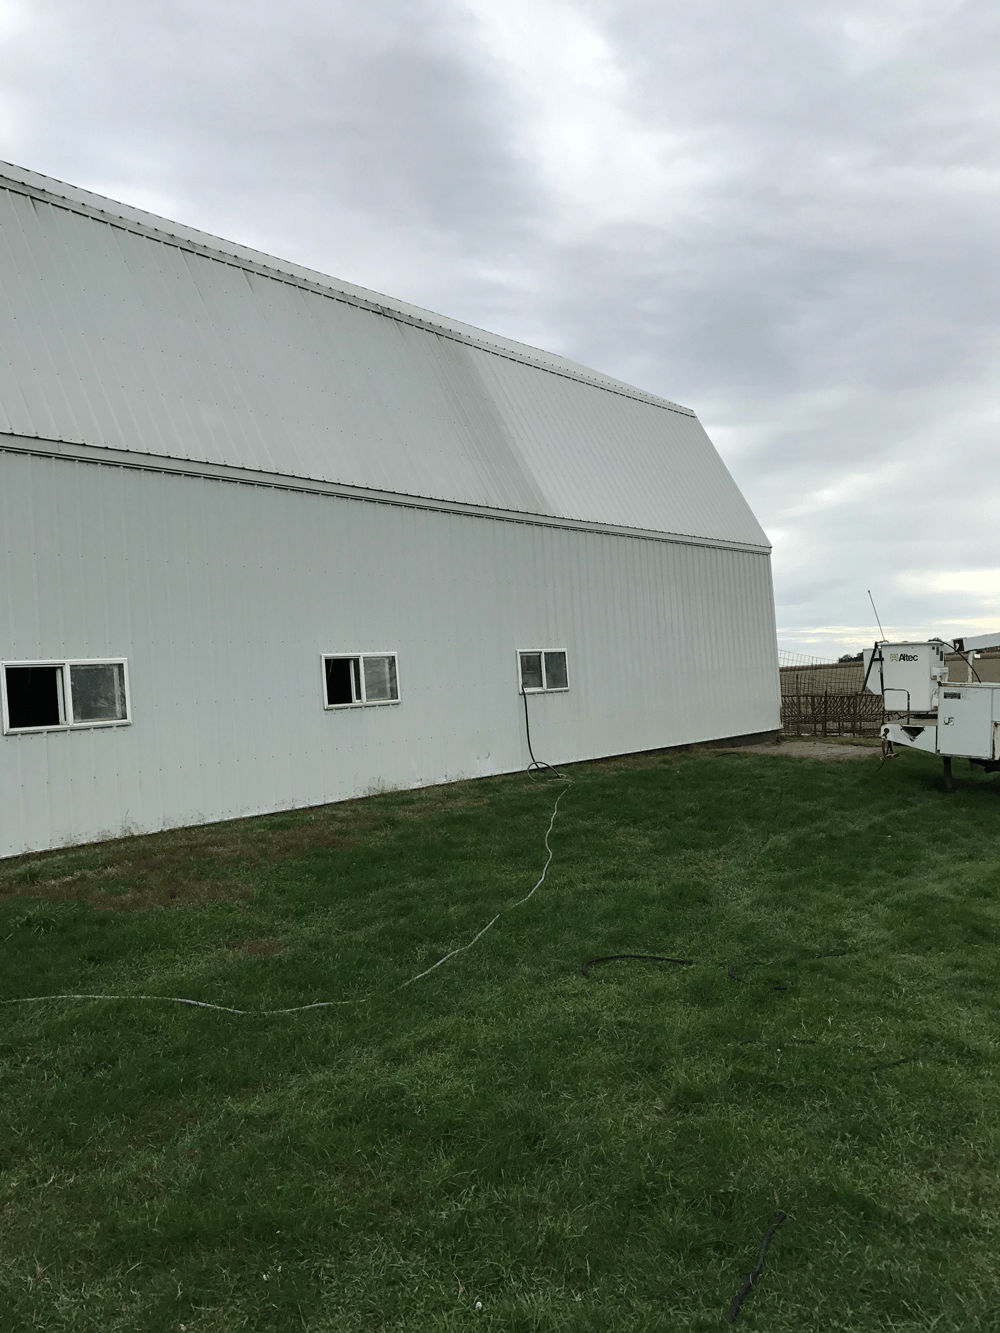 a large white barn with a trailer parked in front of it .